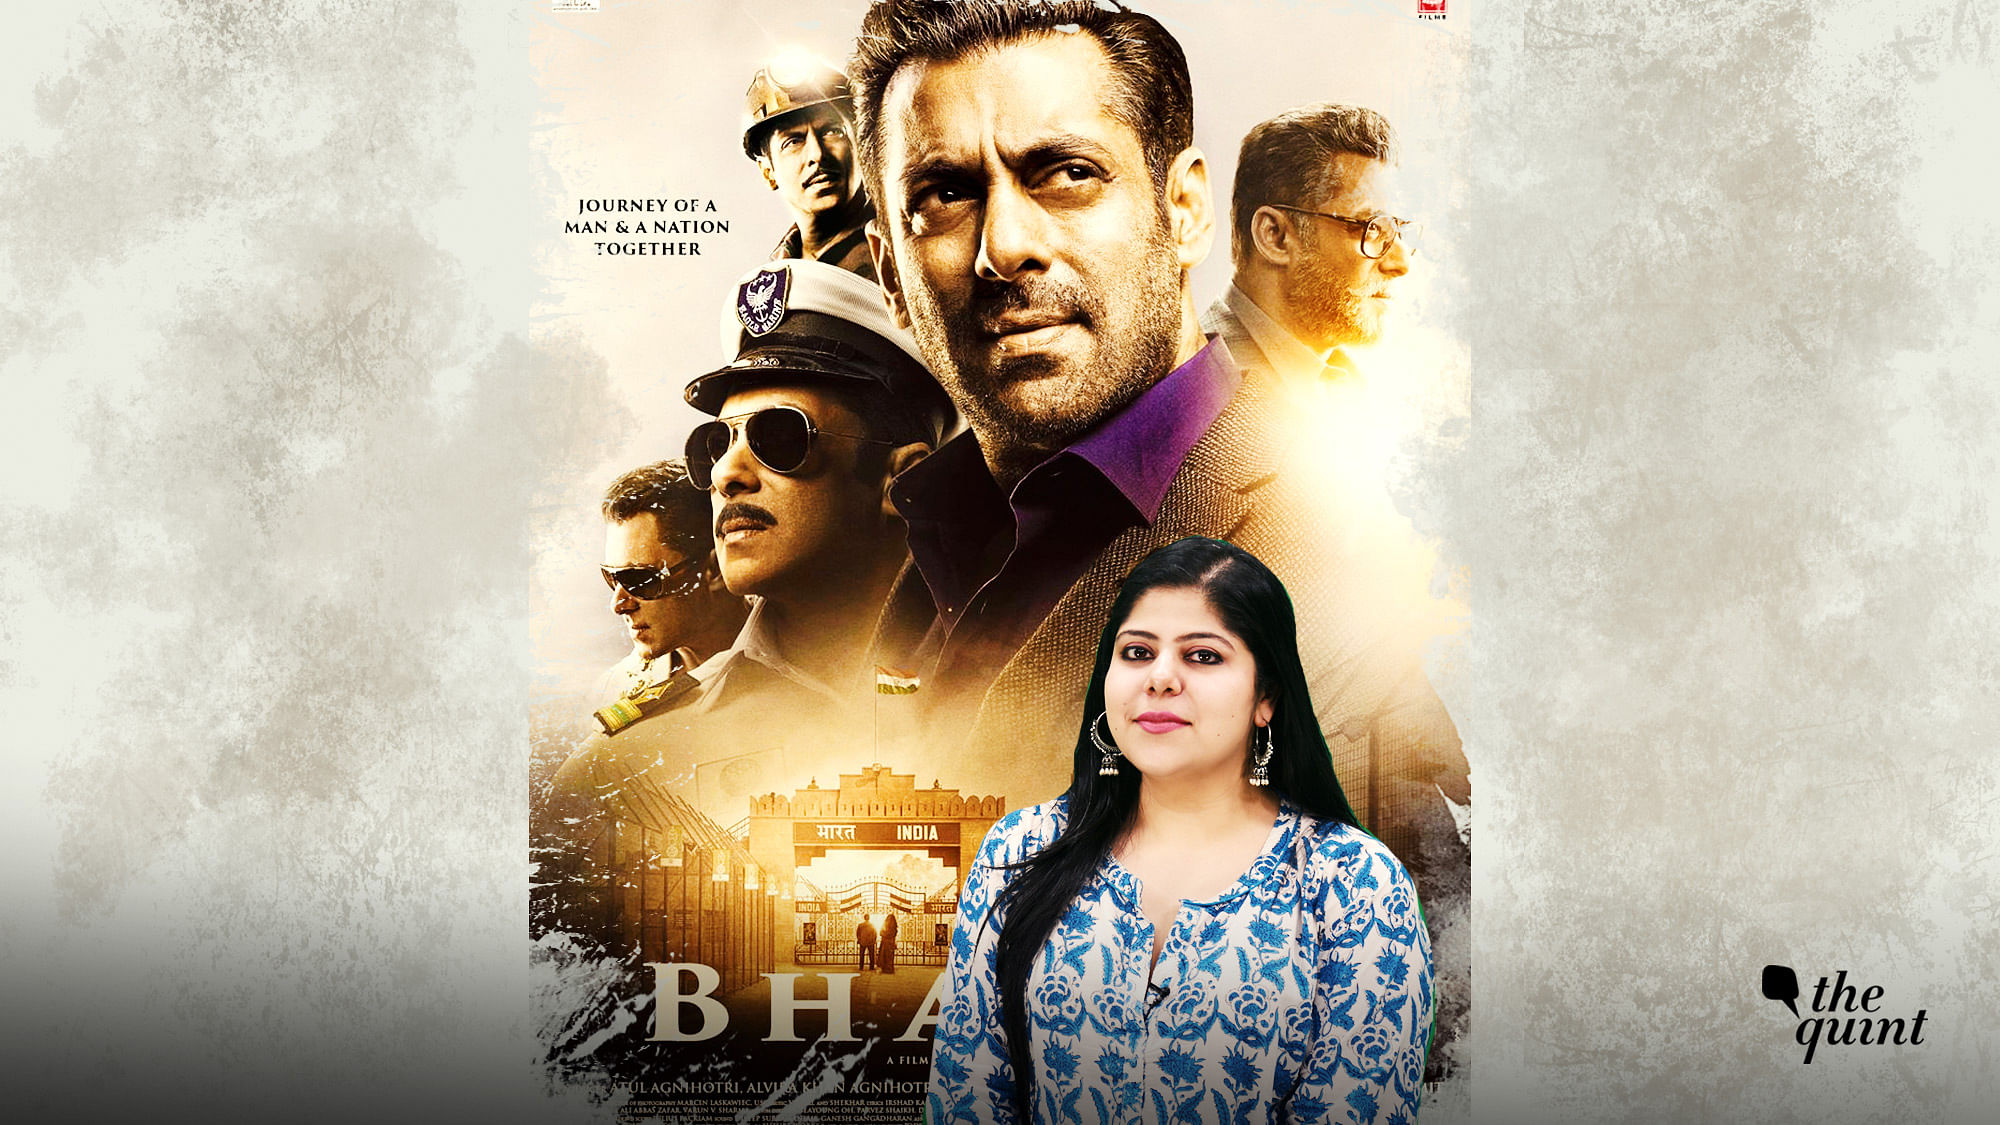 Watch RJ Stutee’s review of the film Bharat.&nbsp;